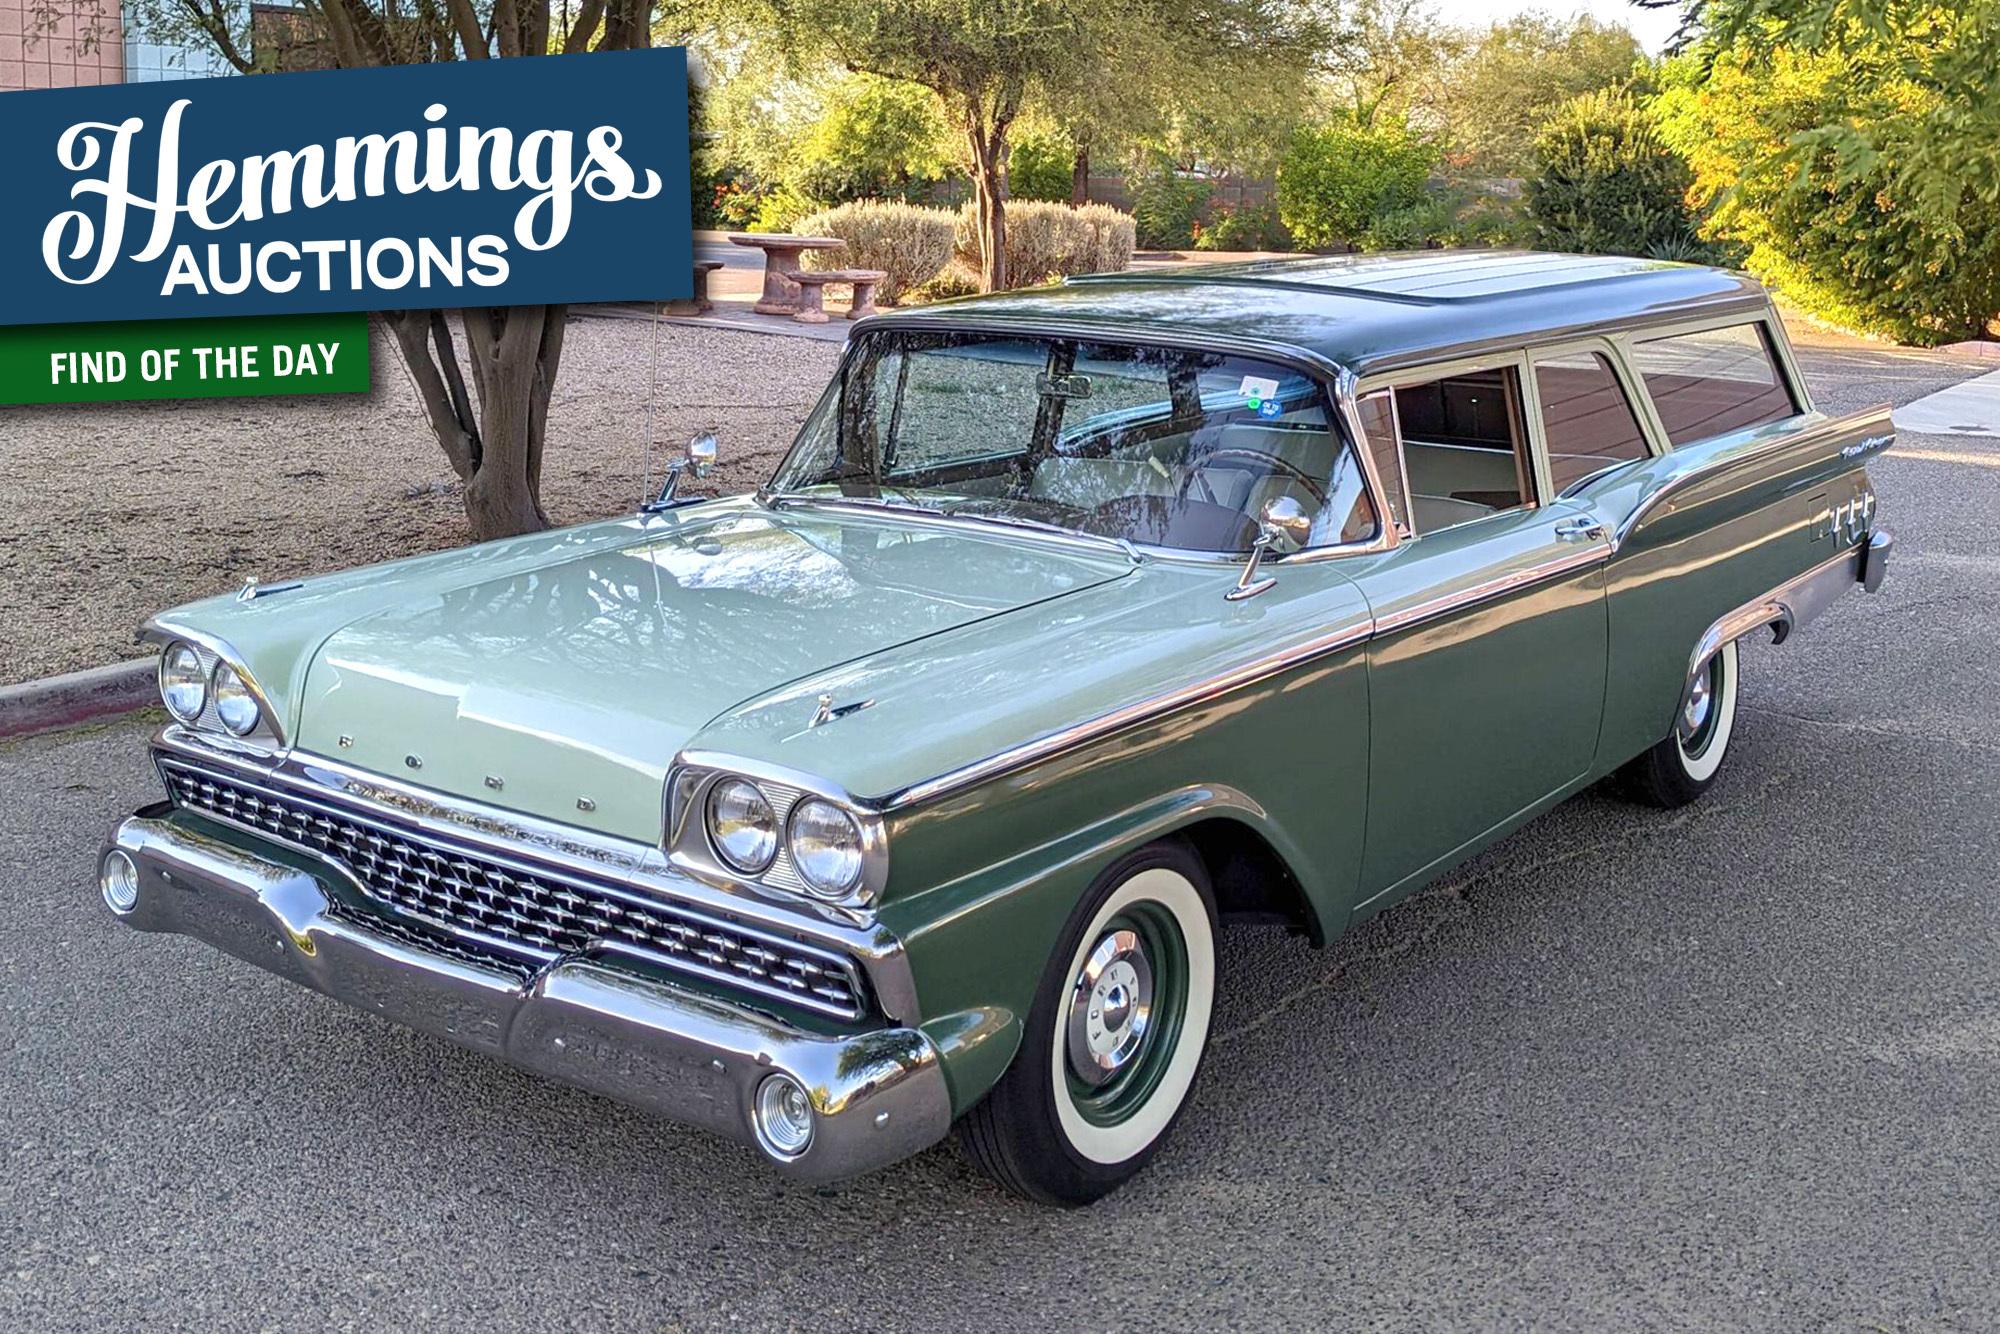 Fully restored 1959 Ford Ranch Wagon embodies mid-century suburbia